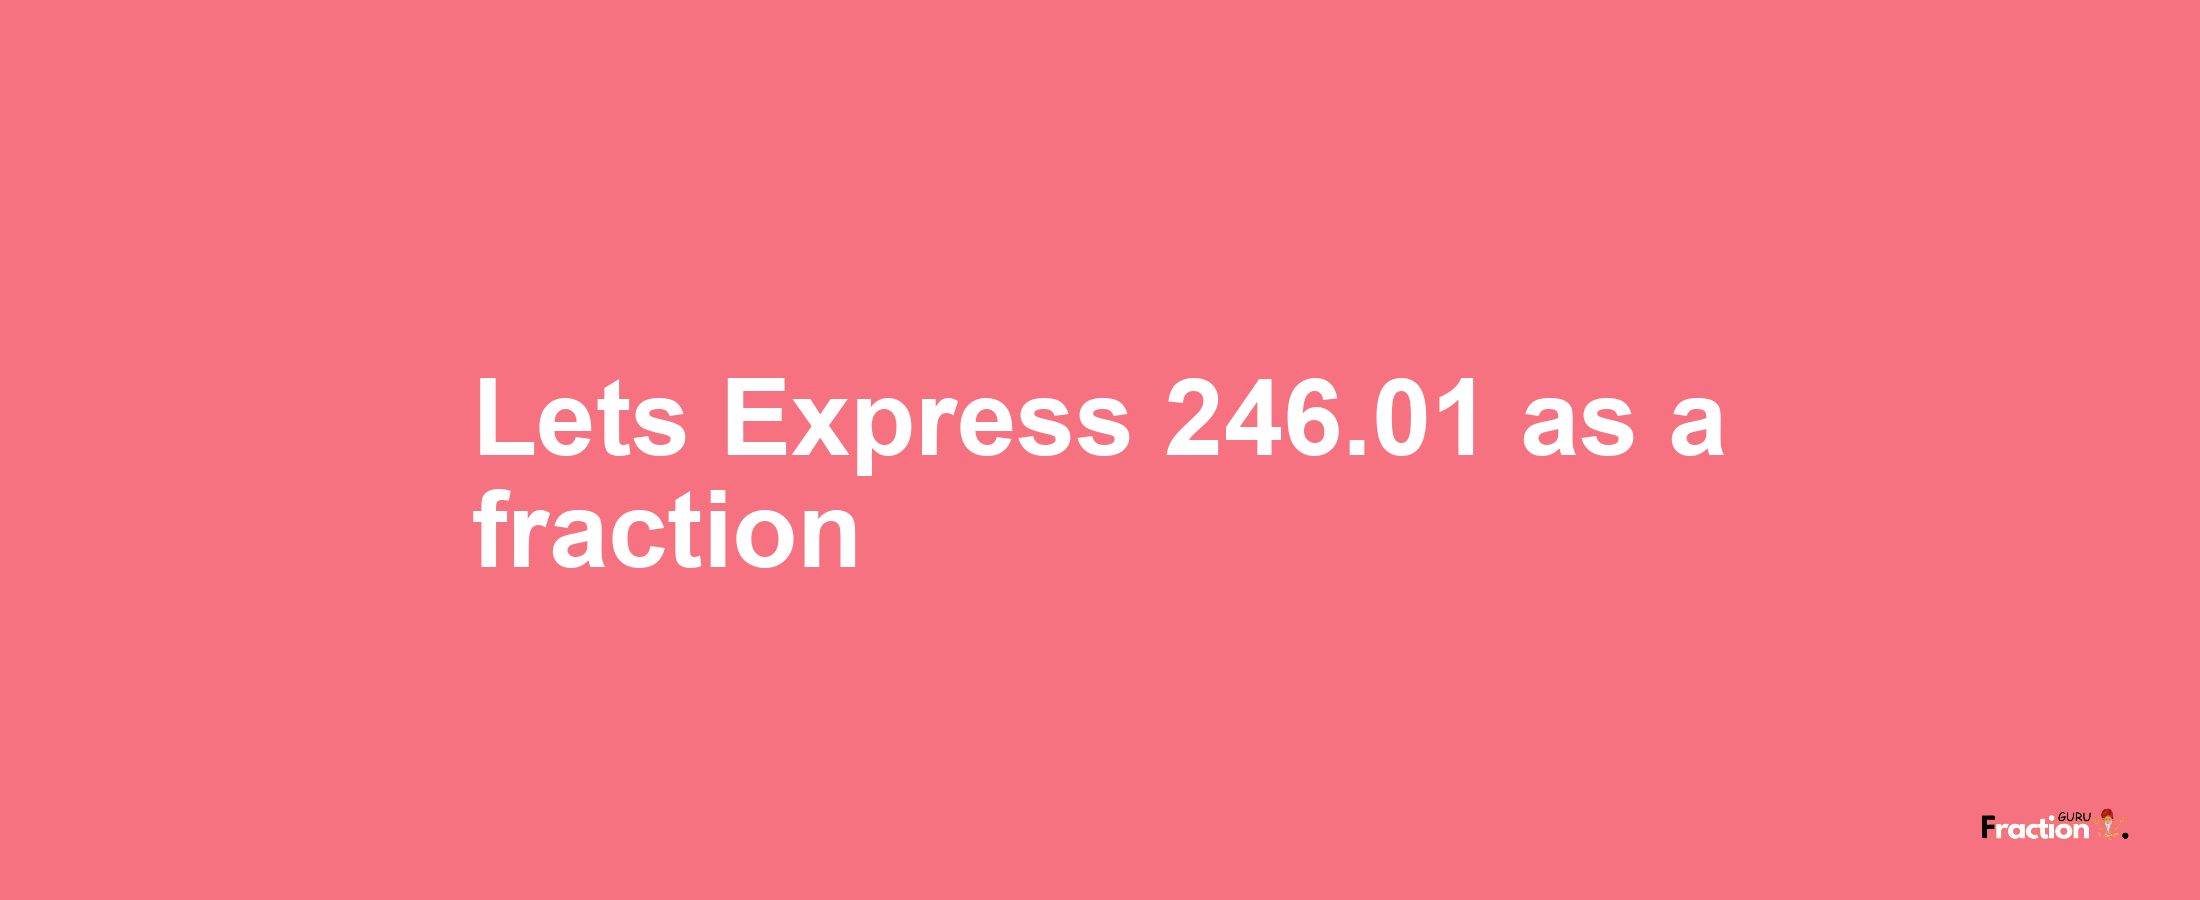 Lets Express 246.01 as afraction